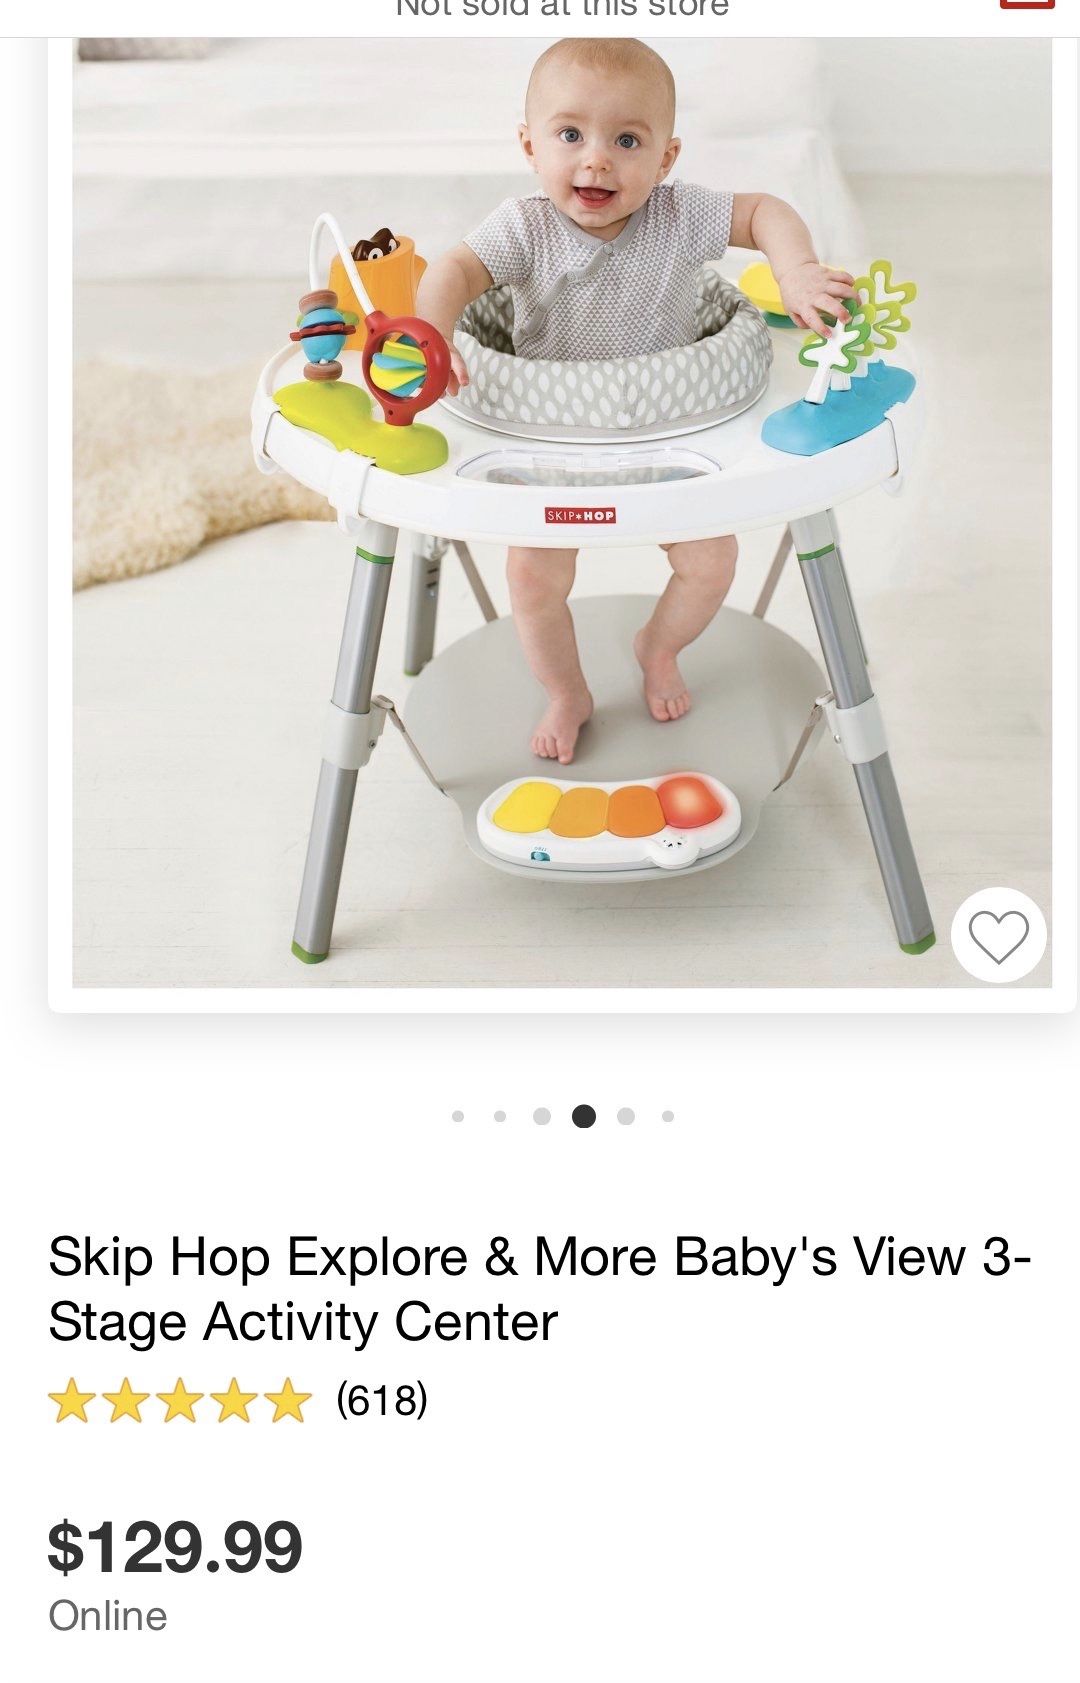 Baby stage activity center